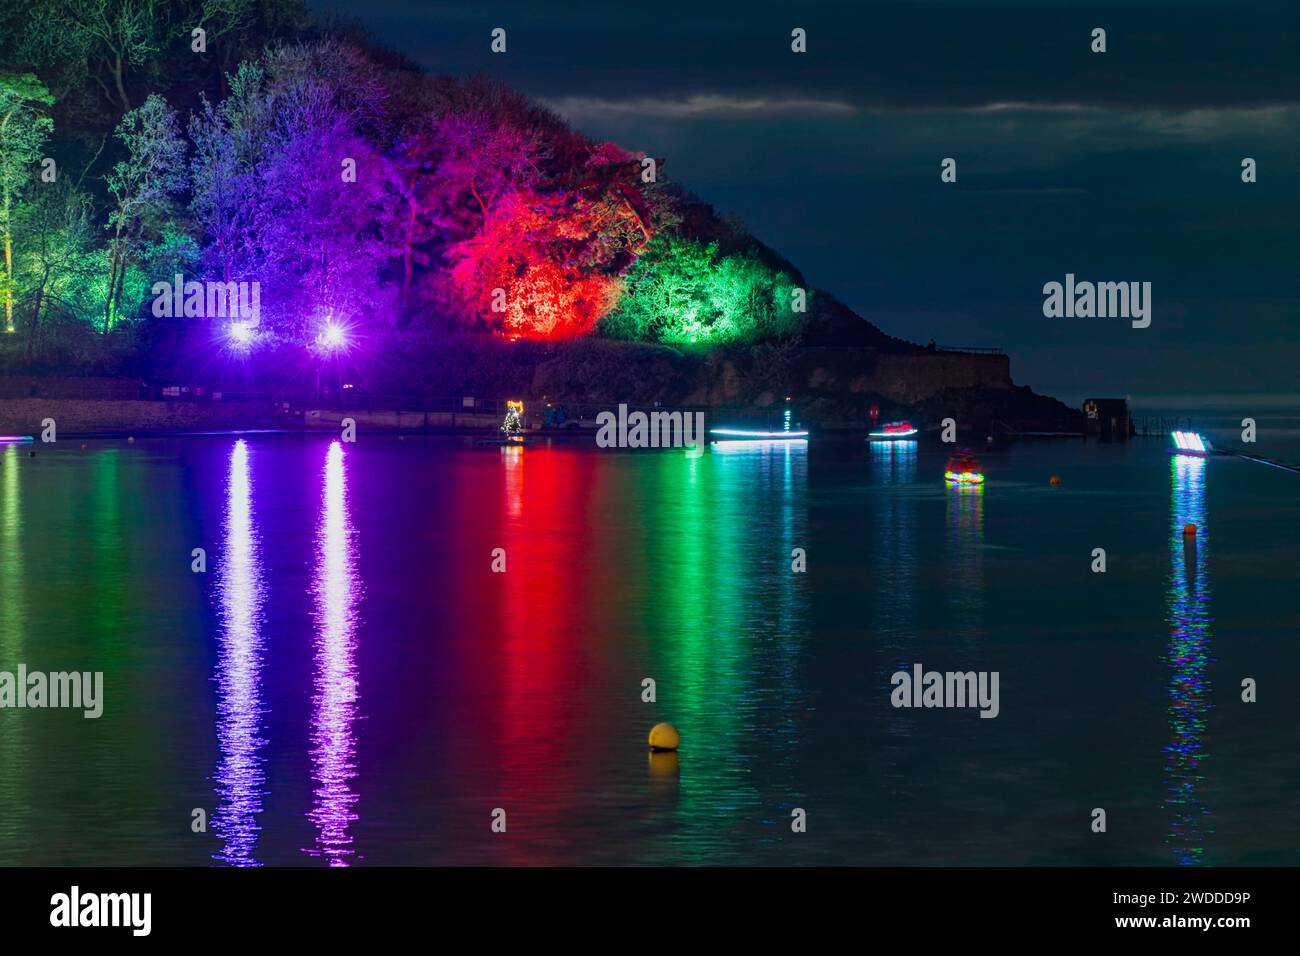 Boats with lights on on the marine lake Stock Photo